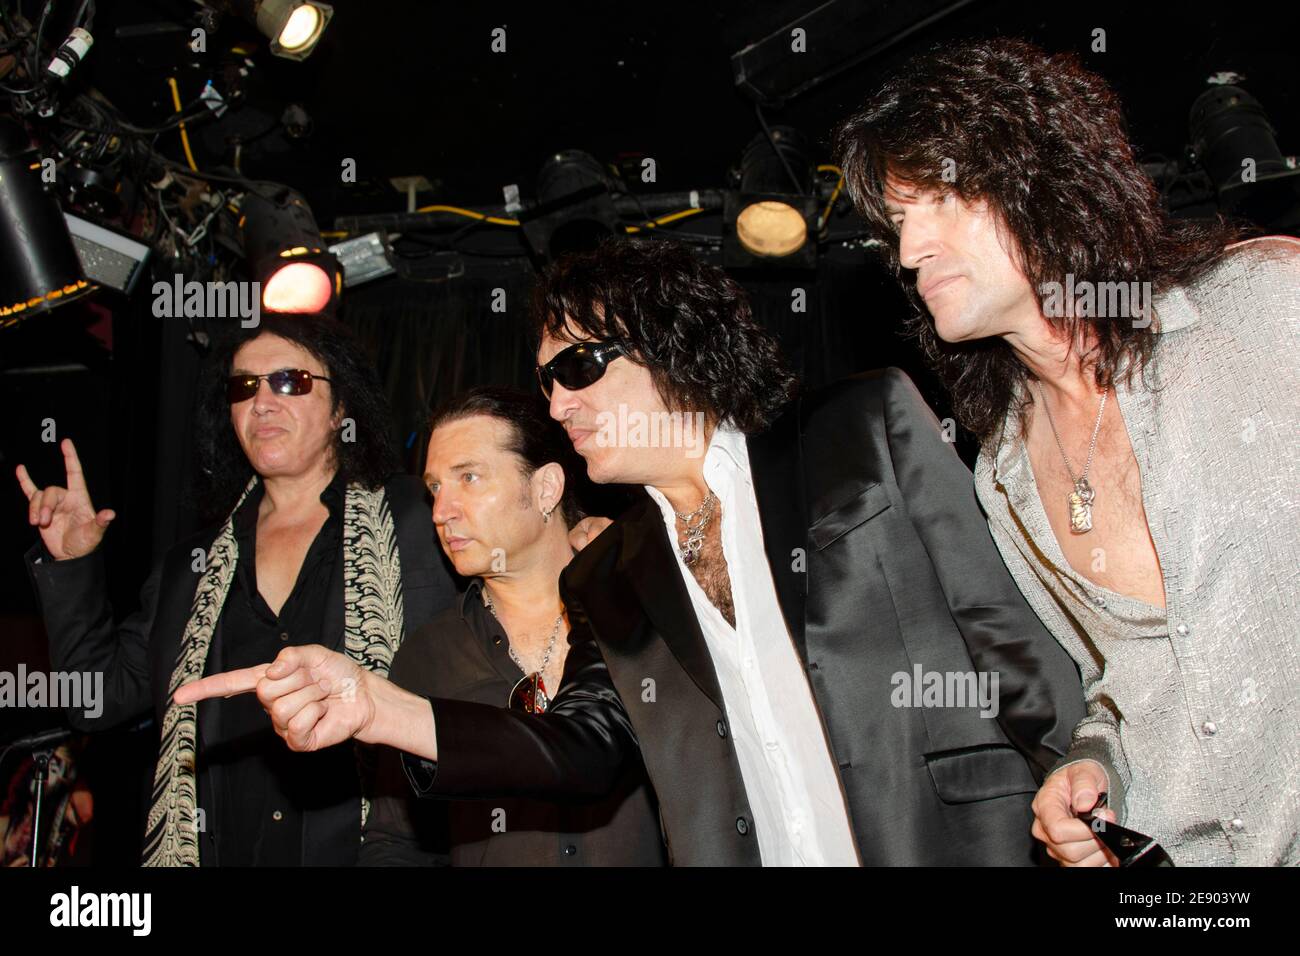 August 21, 2012: (L-R) Gene Simmons, Eric Singer, Paul Stanley and Tommy Thayer of the Rock Band KISS attend the launch of the KISS Monster Book. (Credit Image: © Billy Bennight/ZUMA Wire) Stock Photo